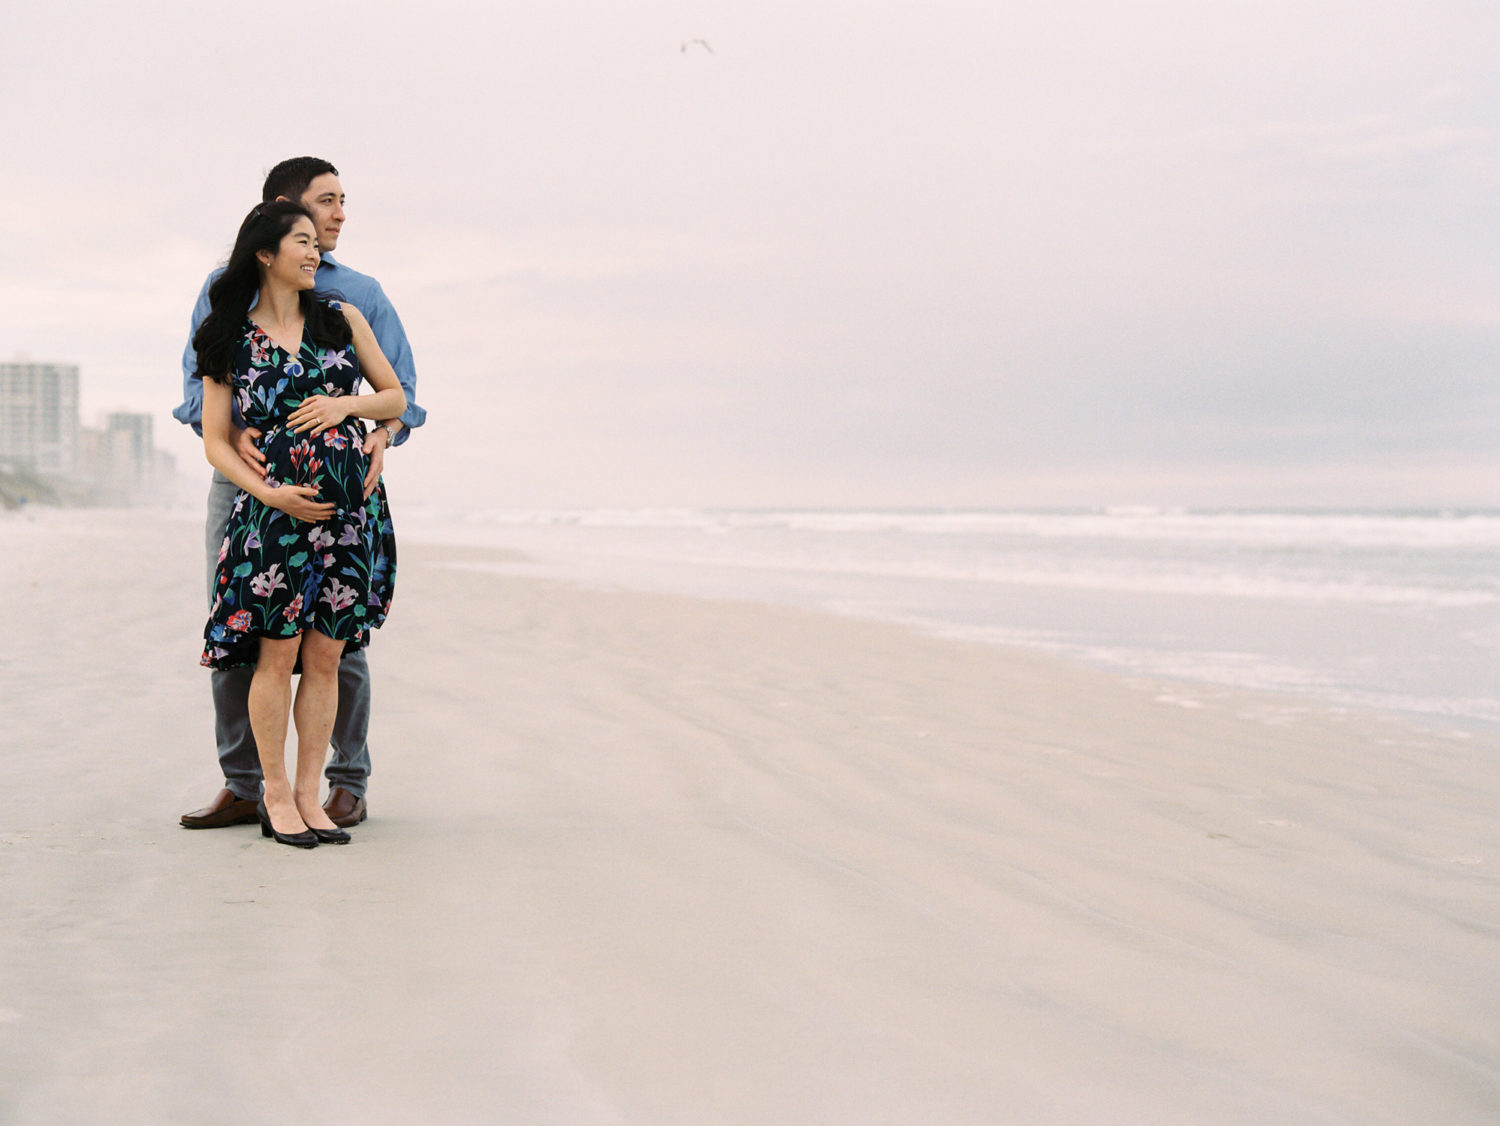 Man and his pregnant wife standing together on the beach smiling and looking at the ocean